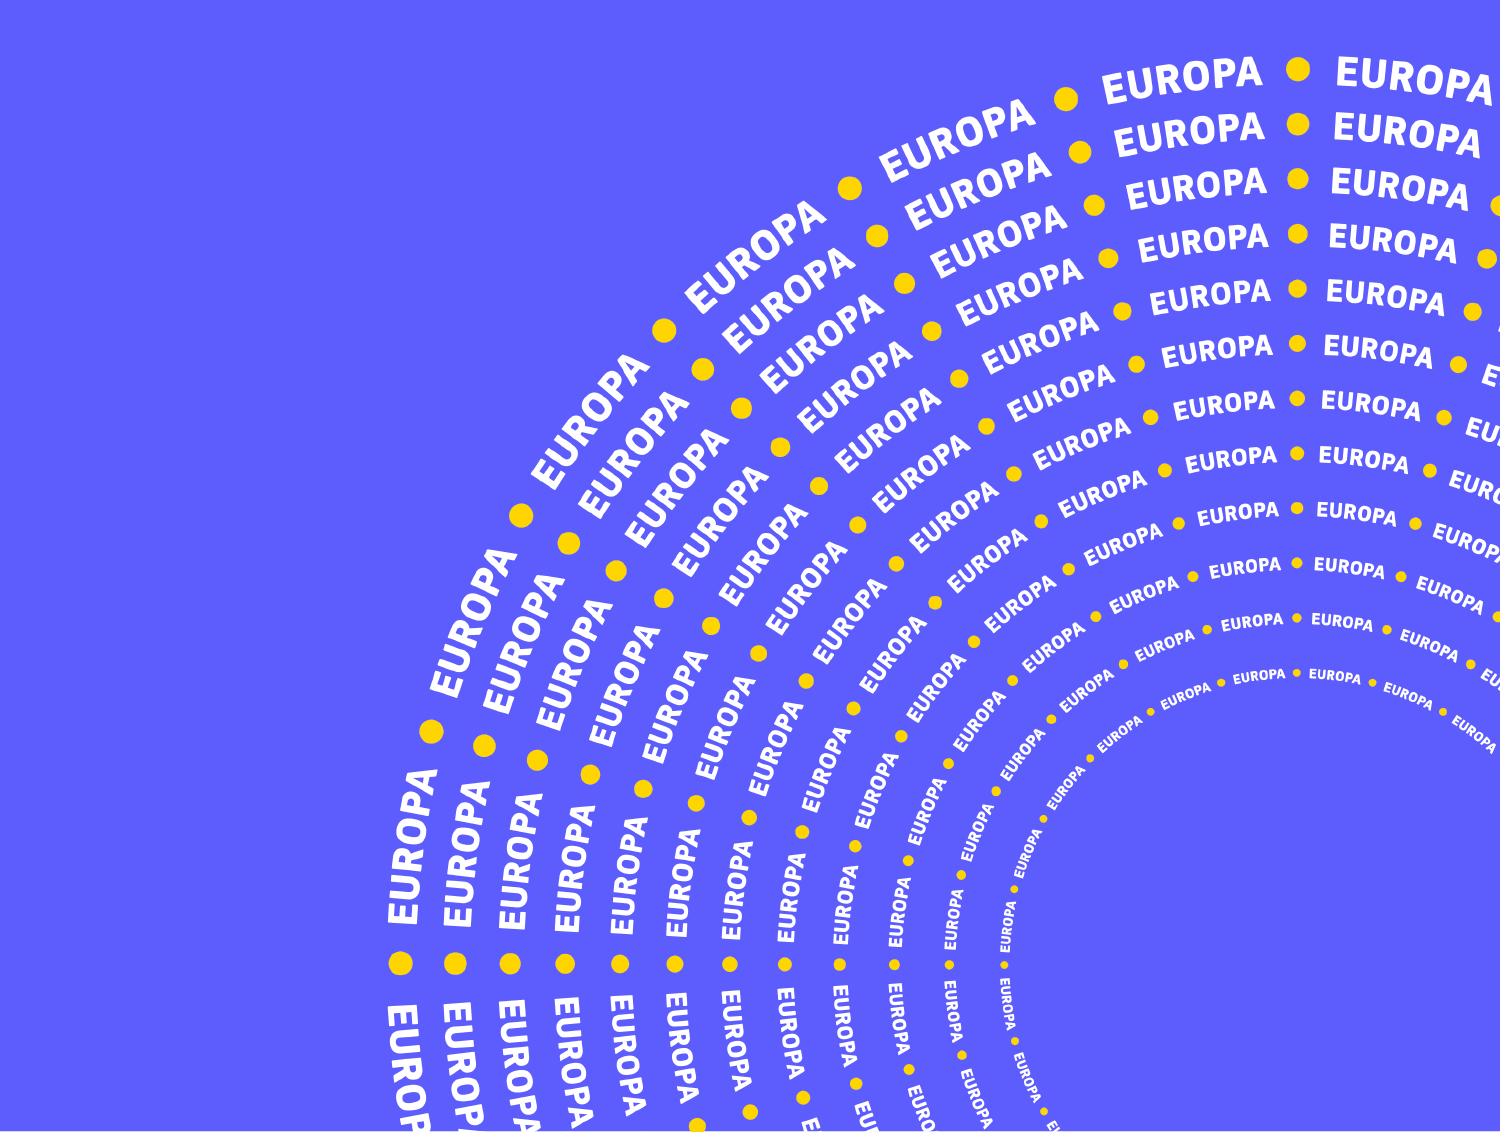 Learn about the key highlights of the European State of Union address